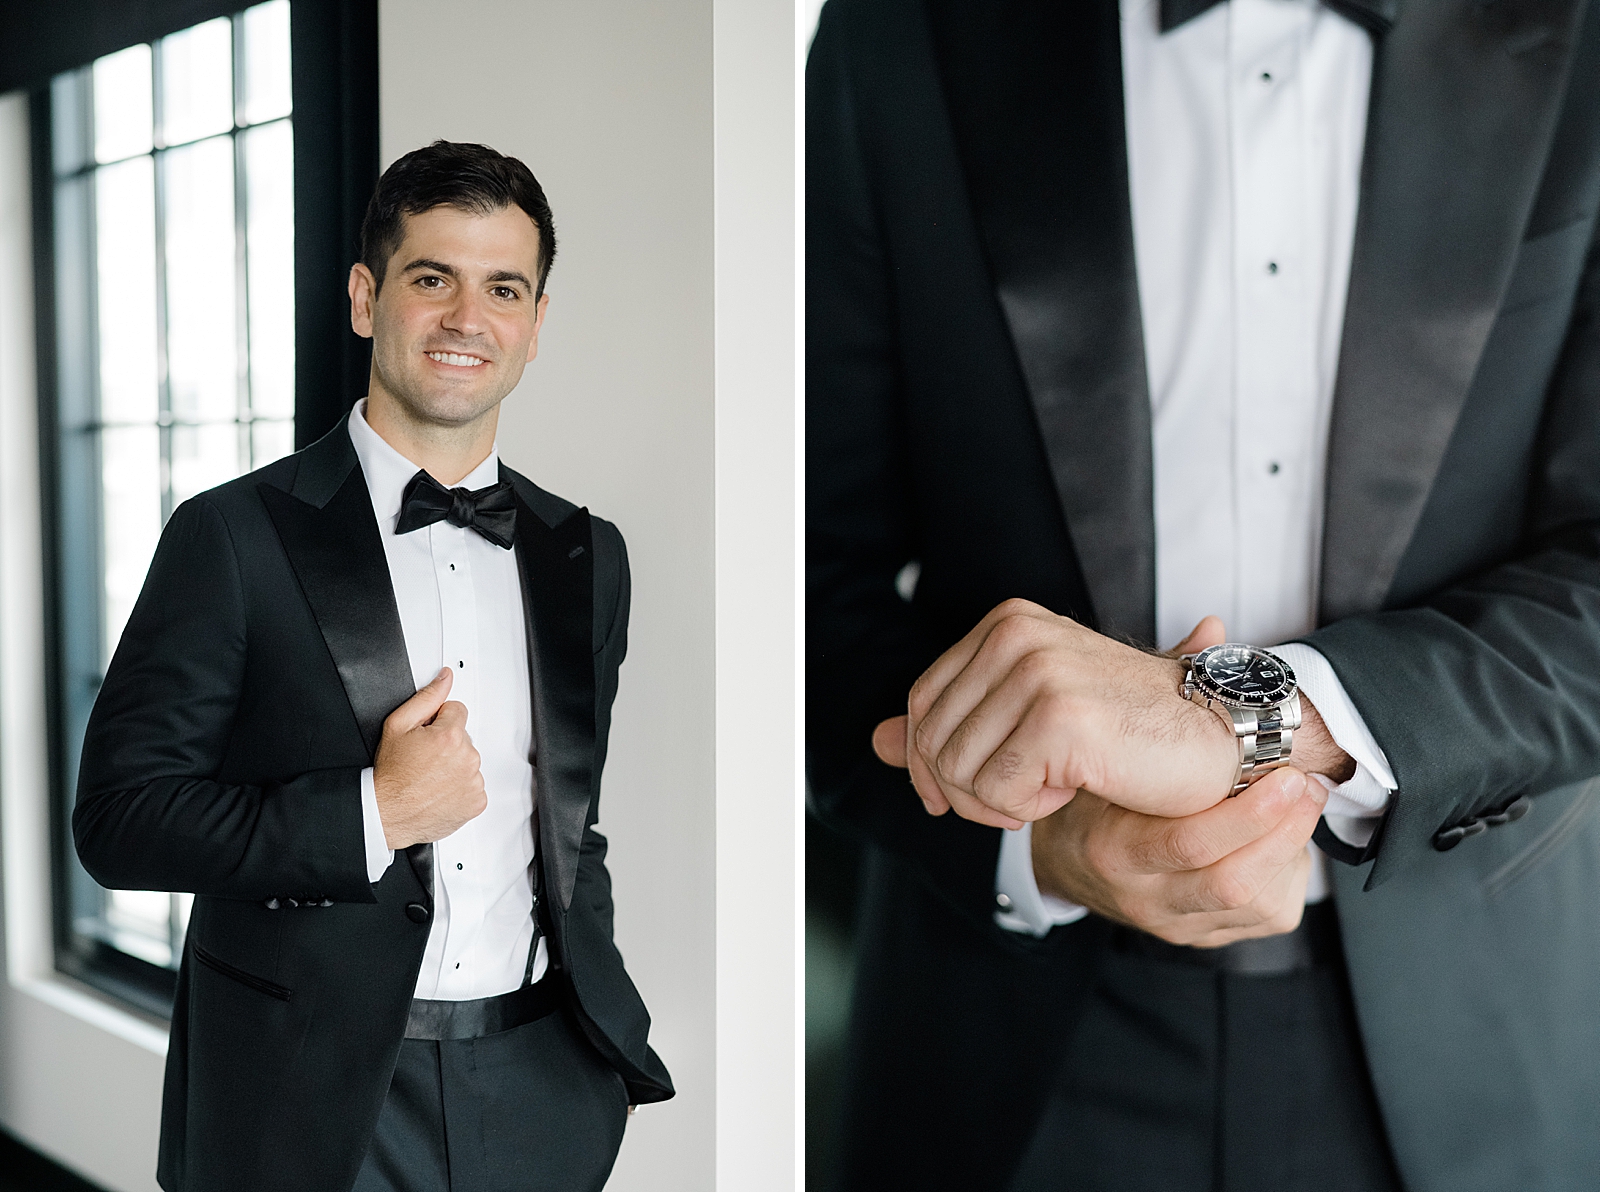 Left photo: Upper body shot of the groom smiling in his tux. 
Right photo: Close up shot of the groom's wrist and watch. 